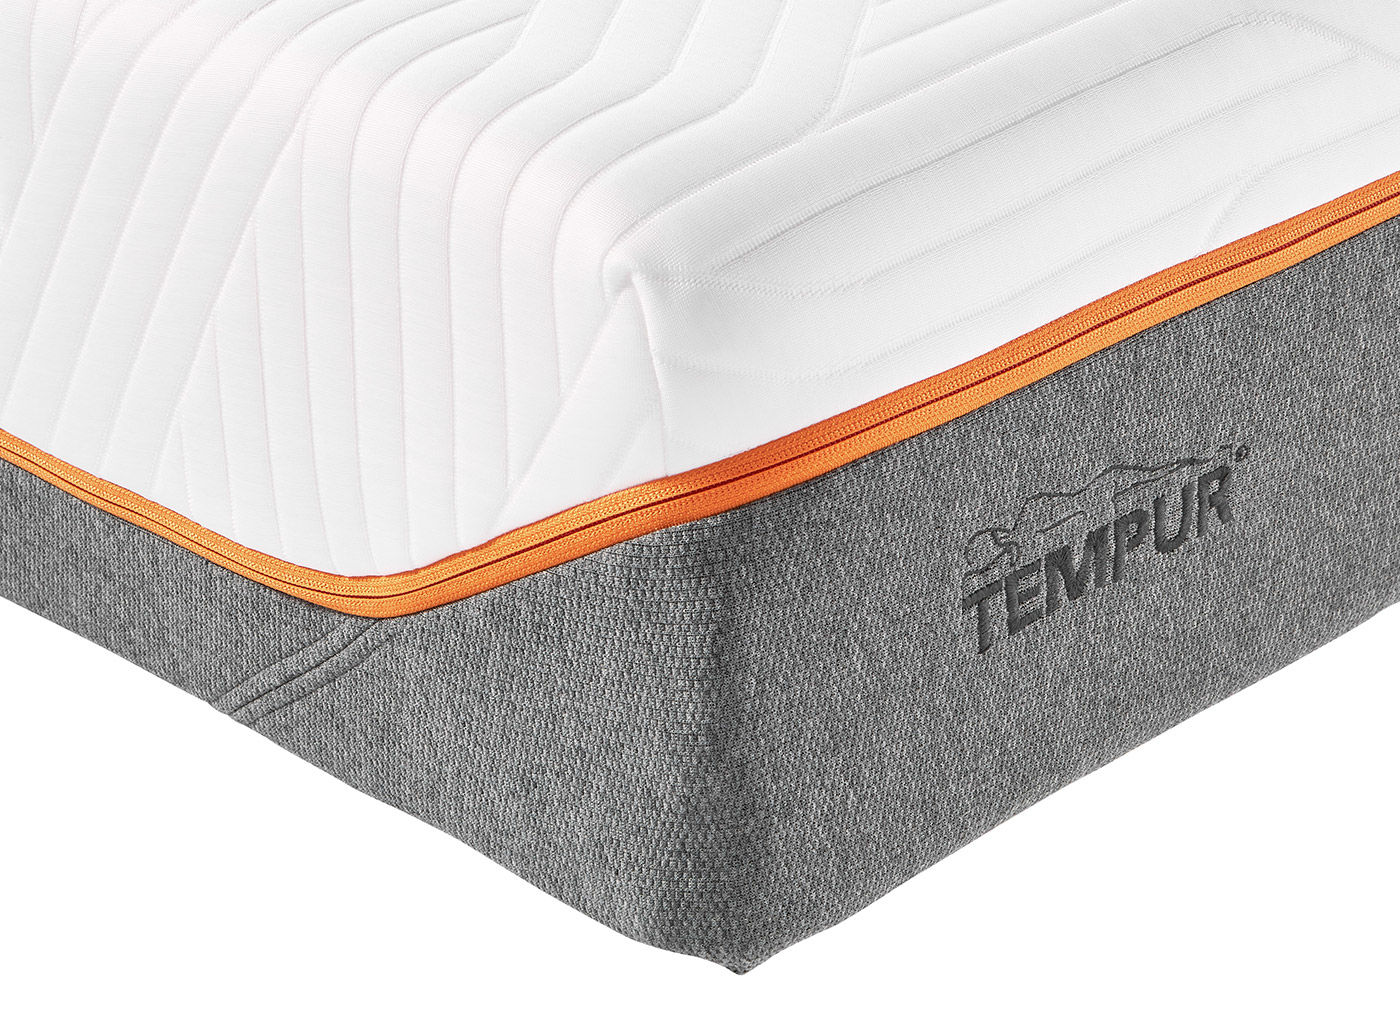 Uncover 72+ Alluring tempur firm elite mattress Not To Be Missed